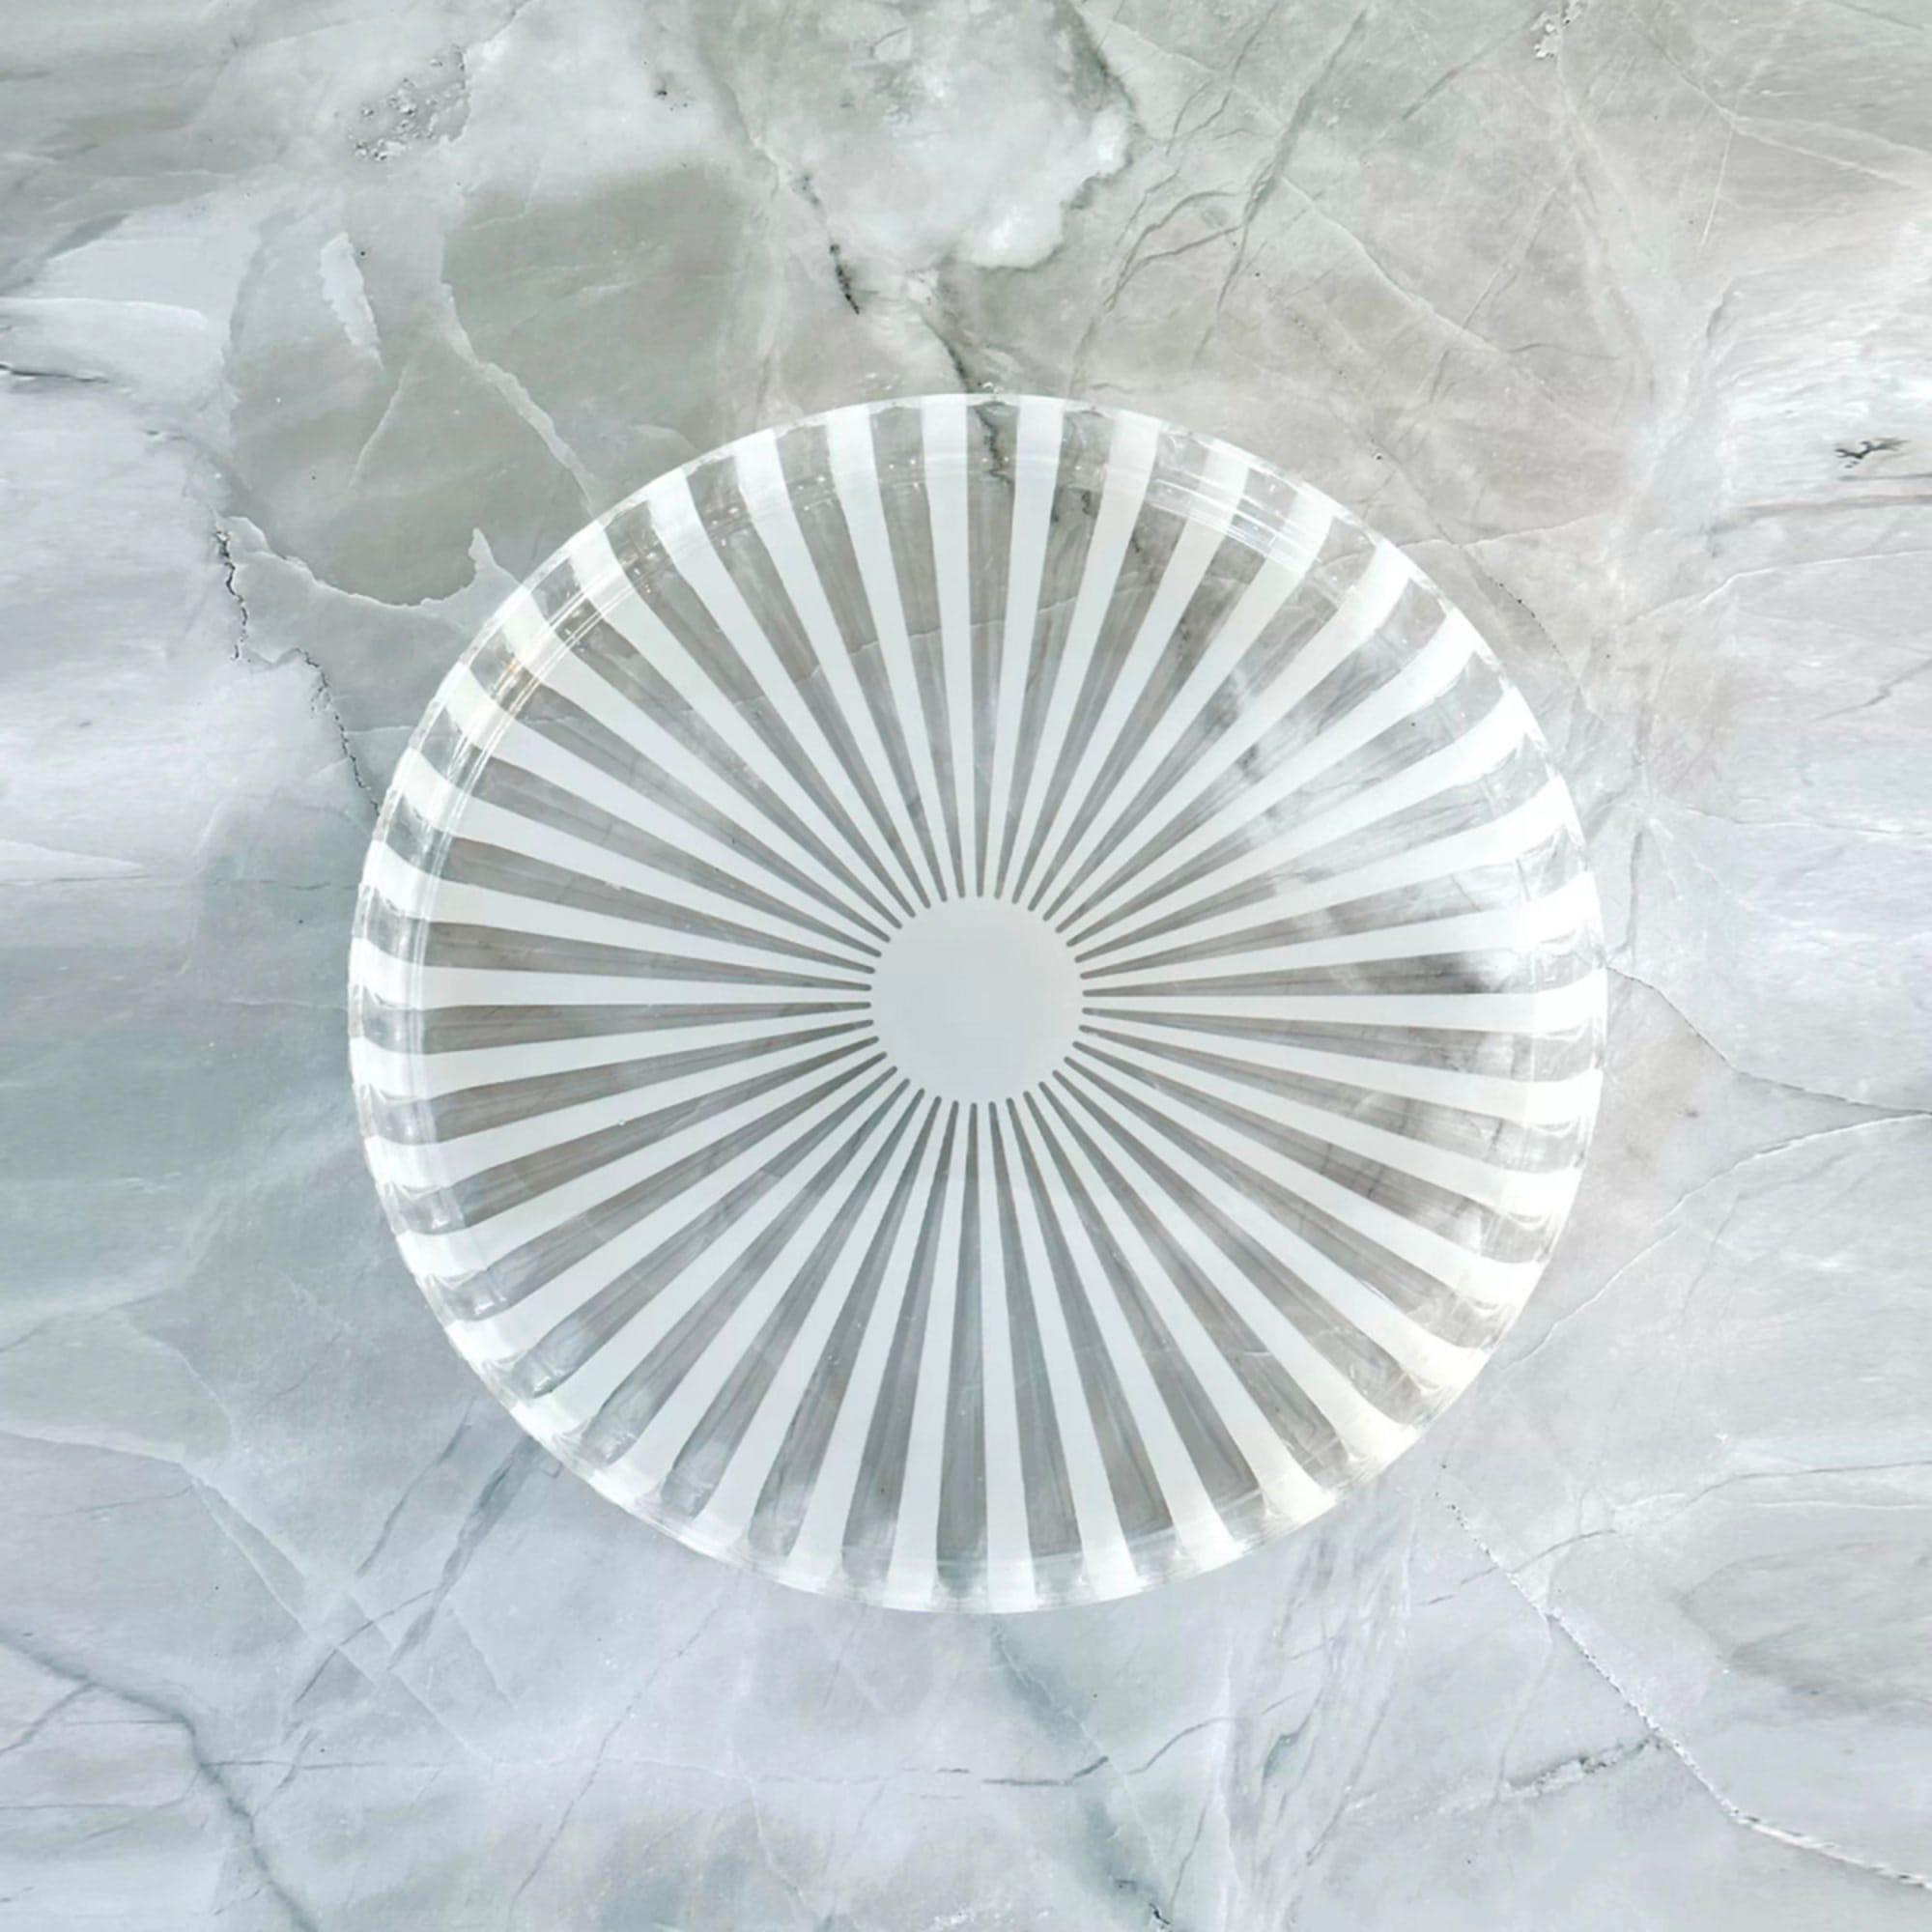 Guzzini Dolcevita Round Serving Tray 31cm Mother of Pearl Image 2